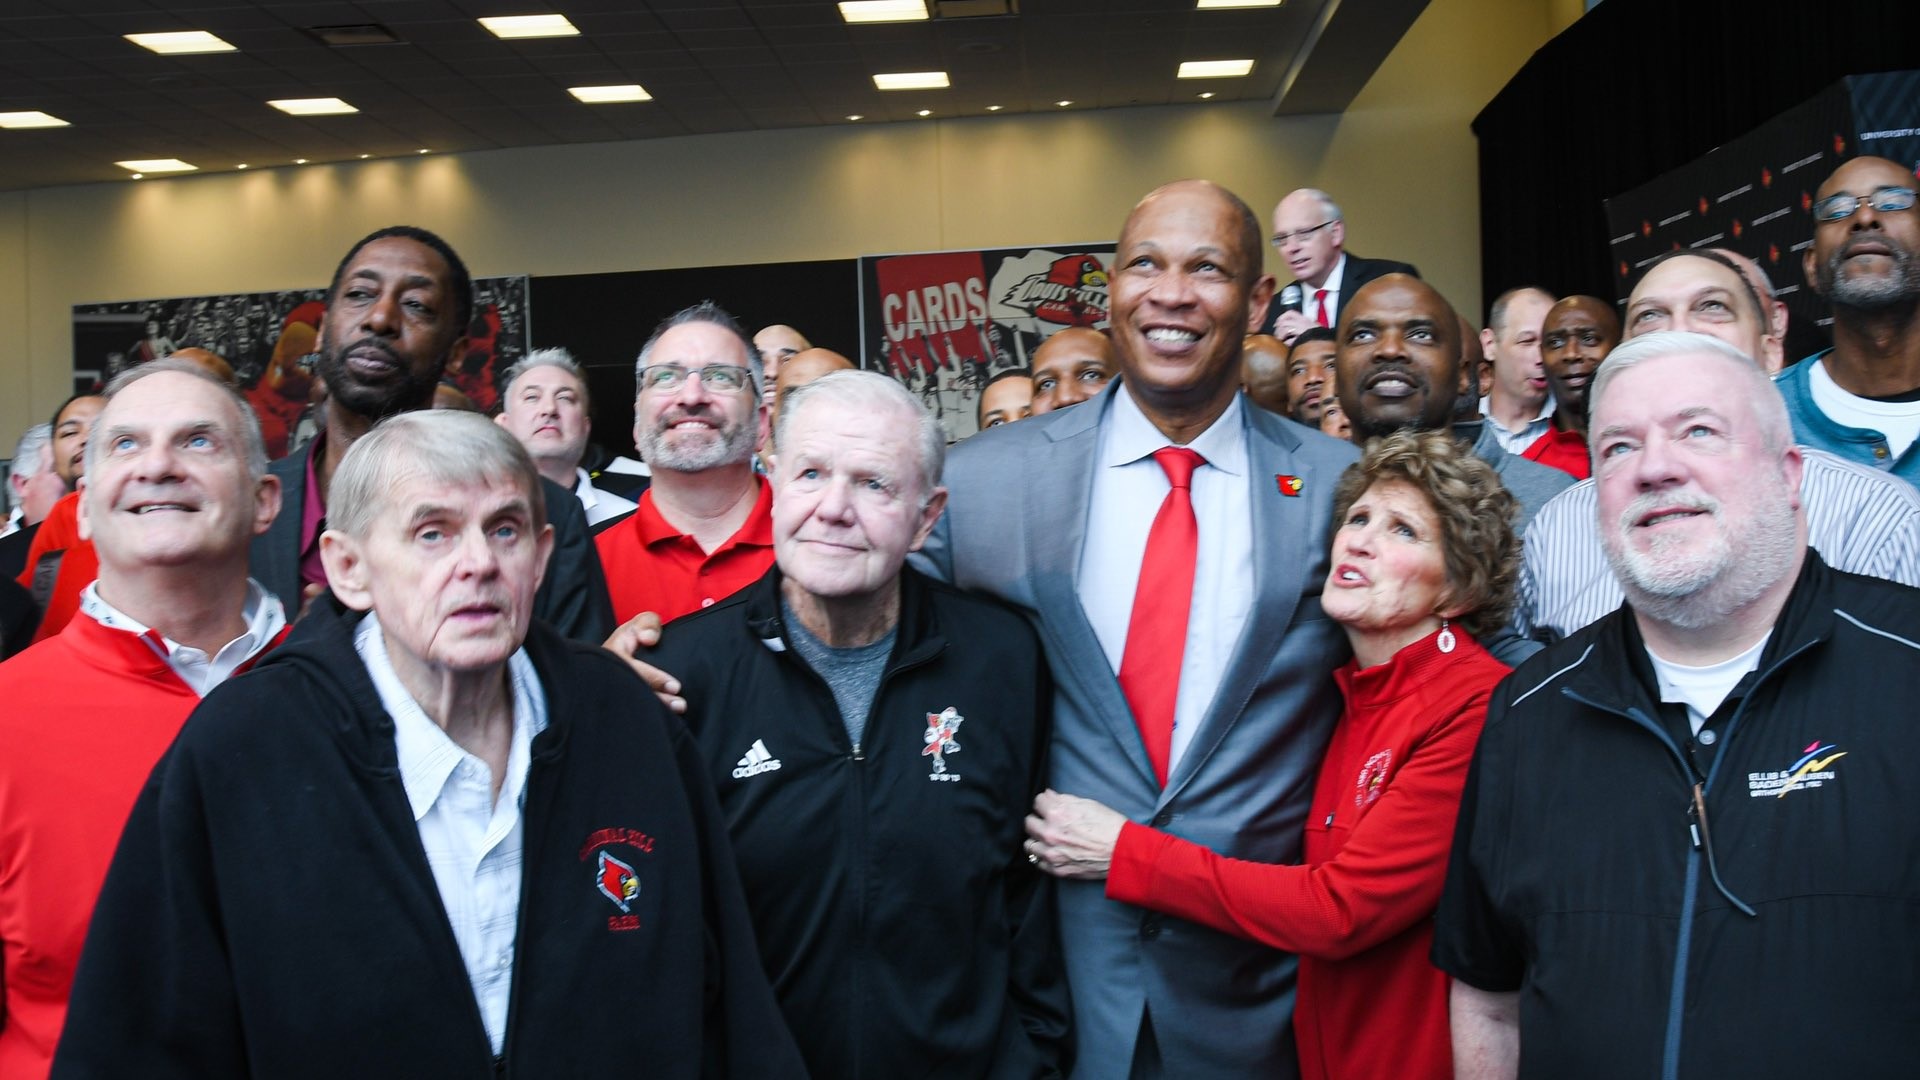 Fans are eager for the future as Kenny Payne accepts the UofL basketball head coach position.